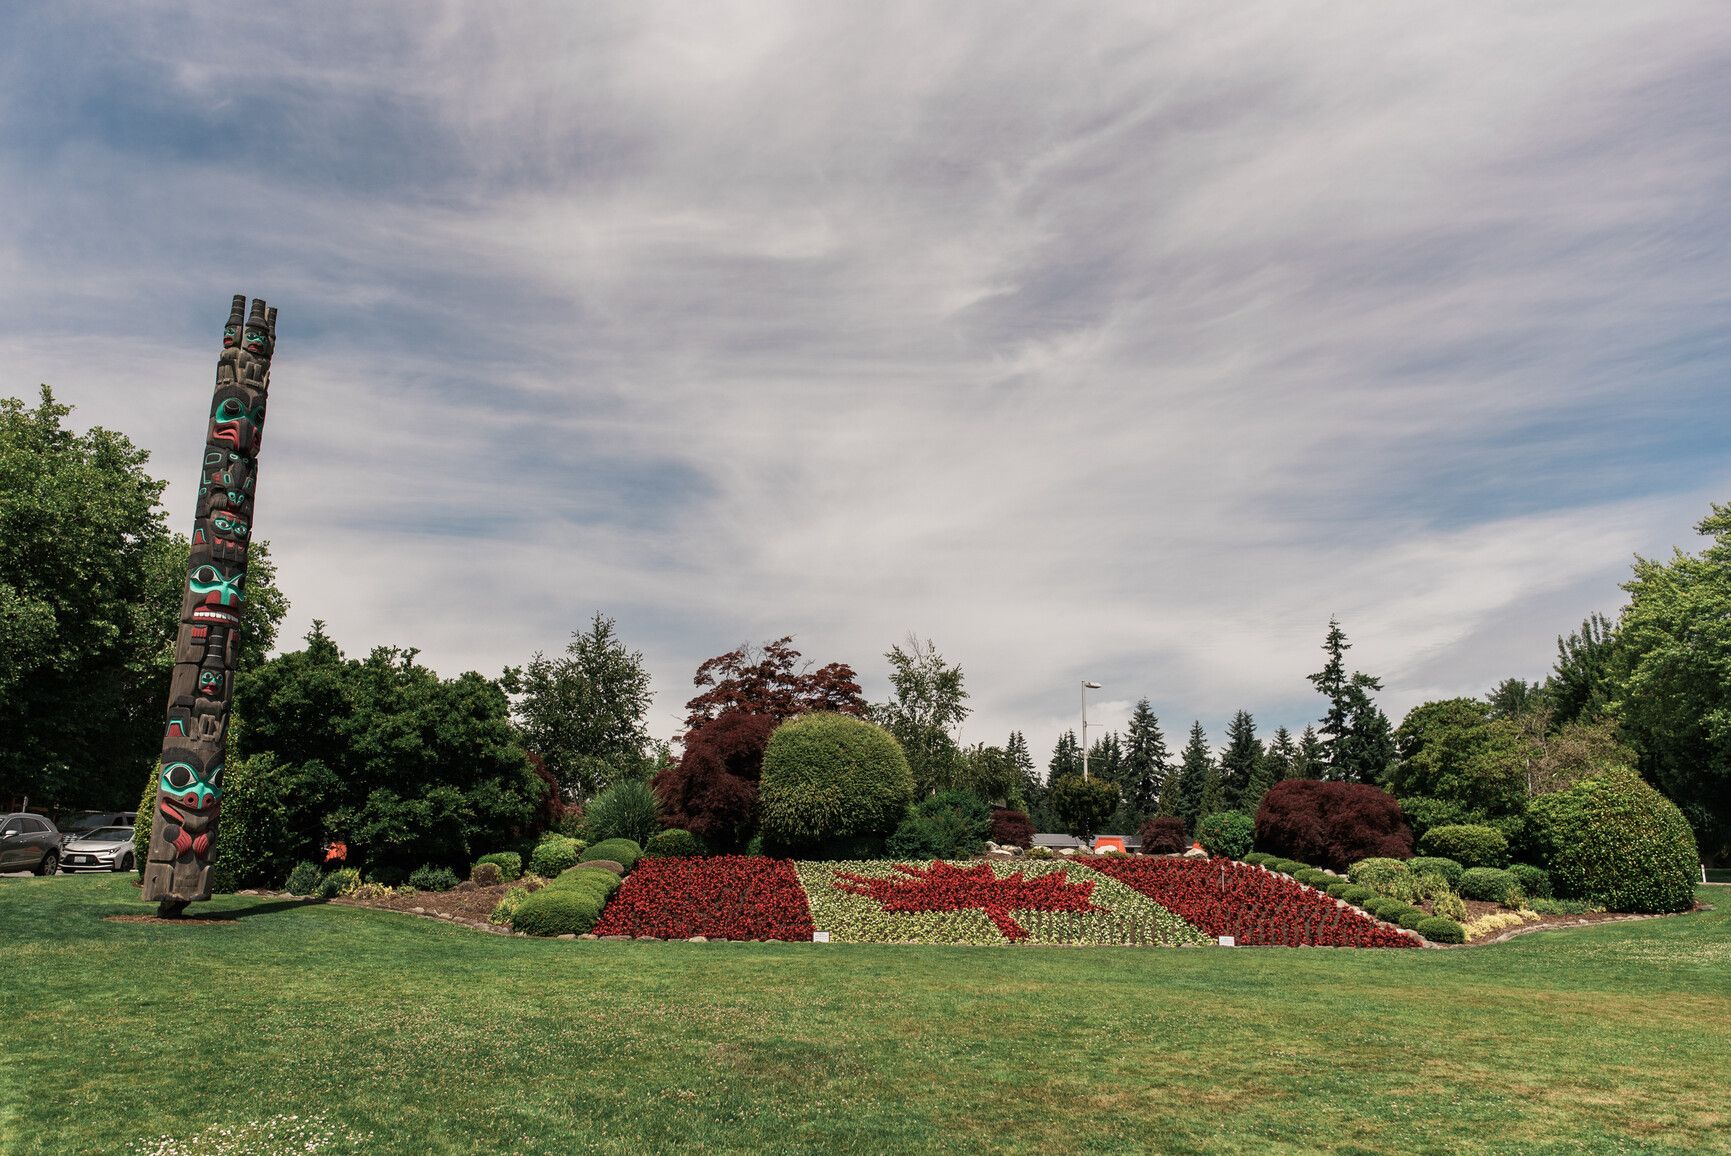 The floral garden in Peace Arch Park with a totem pole and Canadian flag made from flowers.